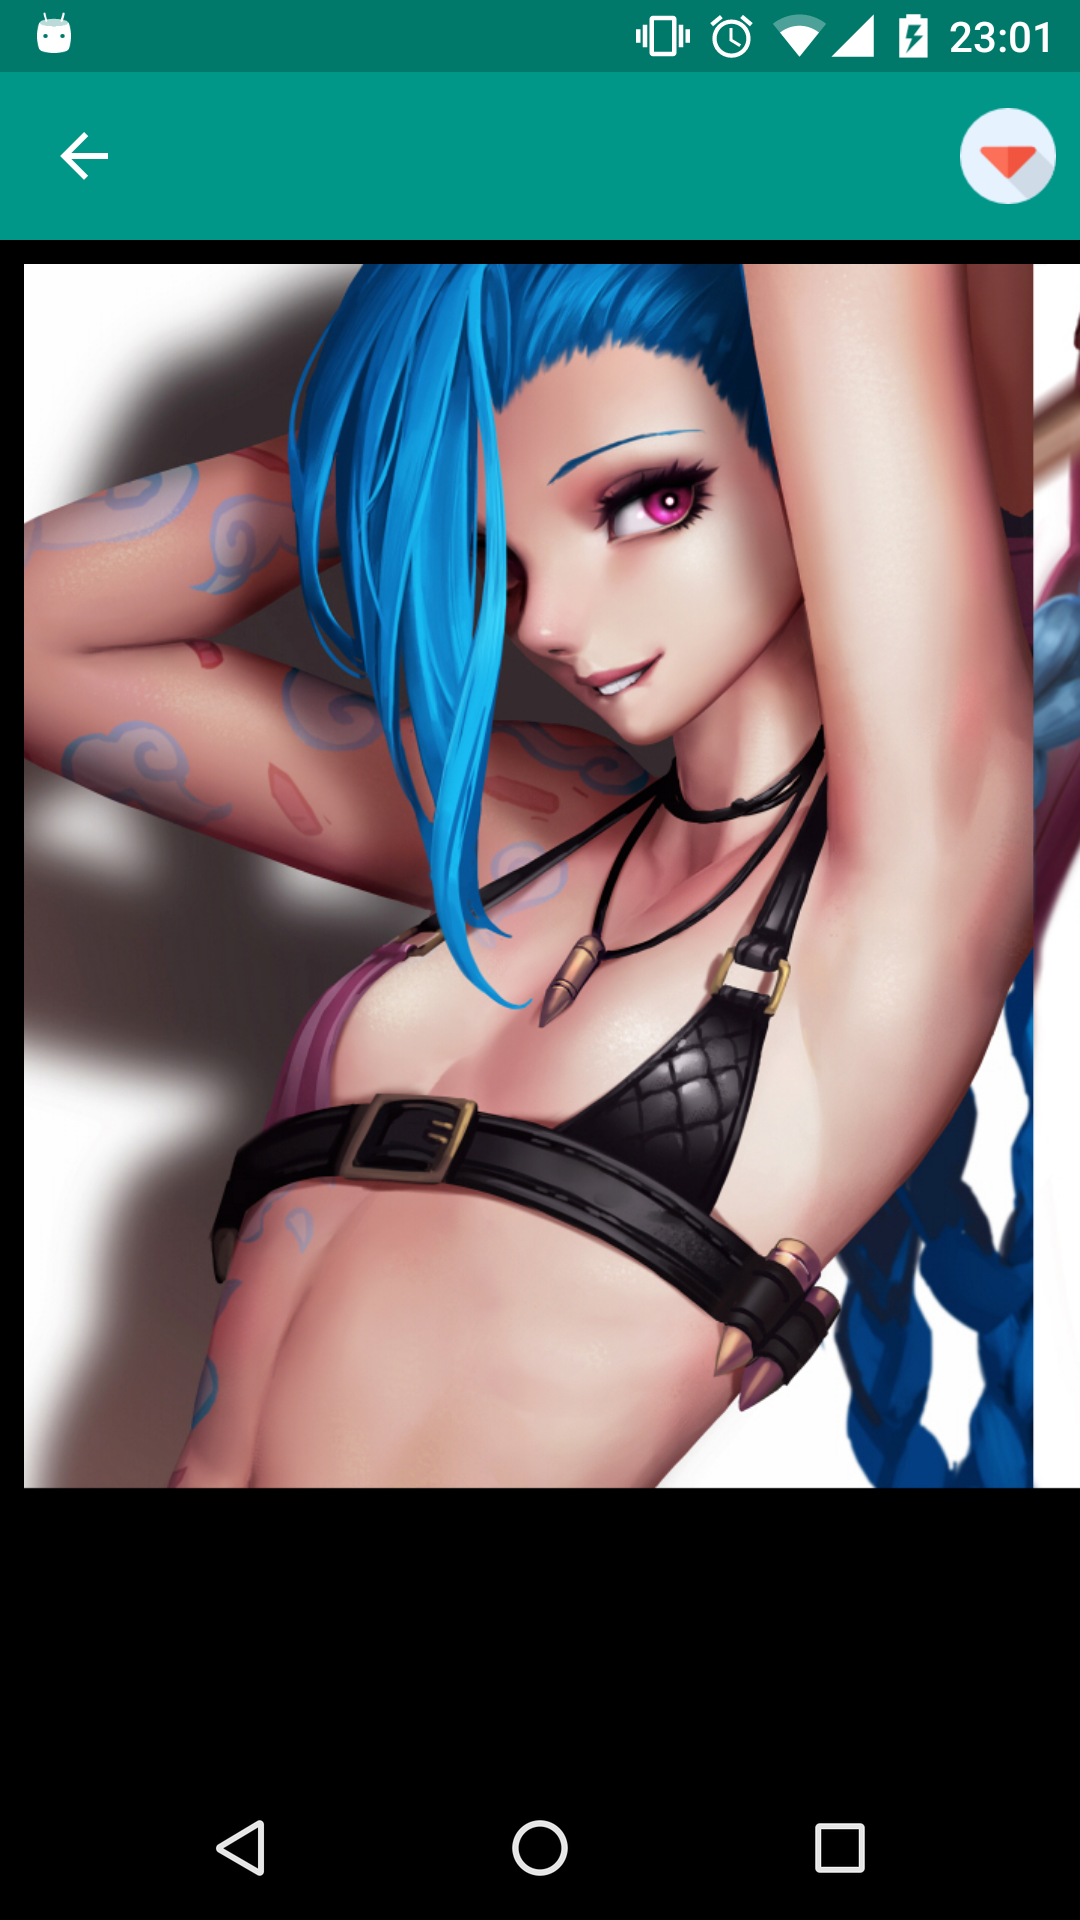 League of Legends wallpapers legends,video,henti,puzzles,henatai,panties,gallery,app,and,apk,porn,download,image,pics,apps,league,photos,wallpapers,harem,game,sexy,pic,ios,hentai,backgrounds,erotica,anime,comix